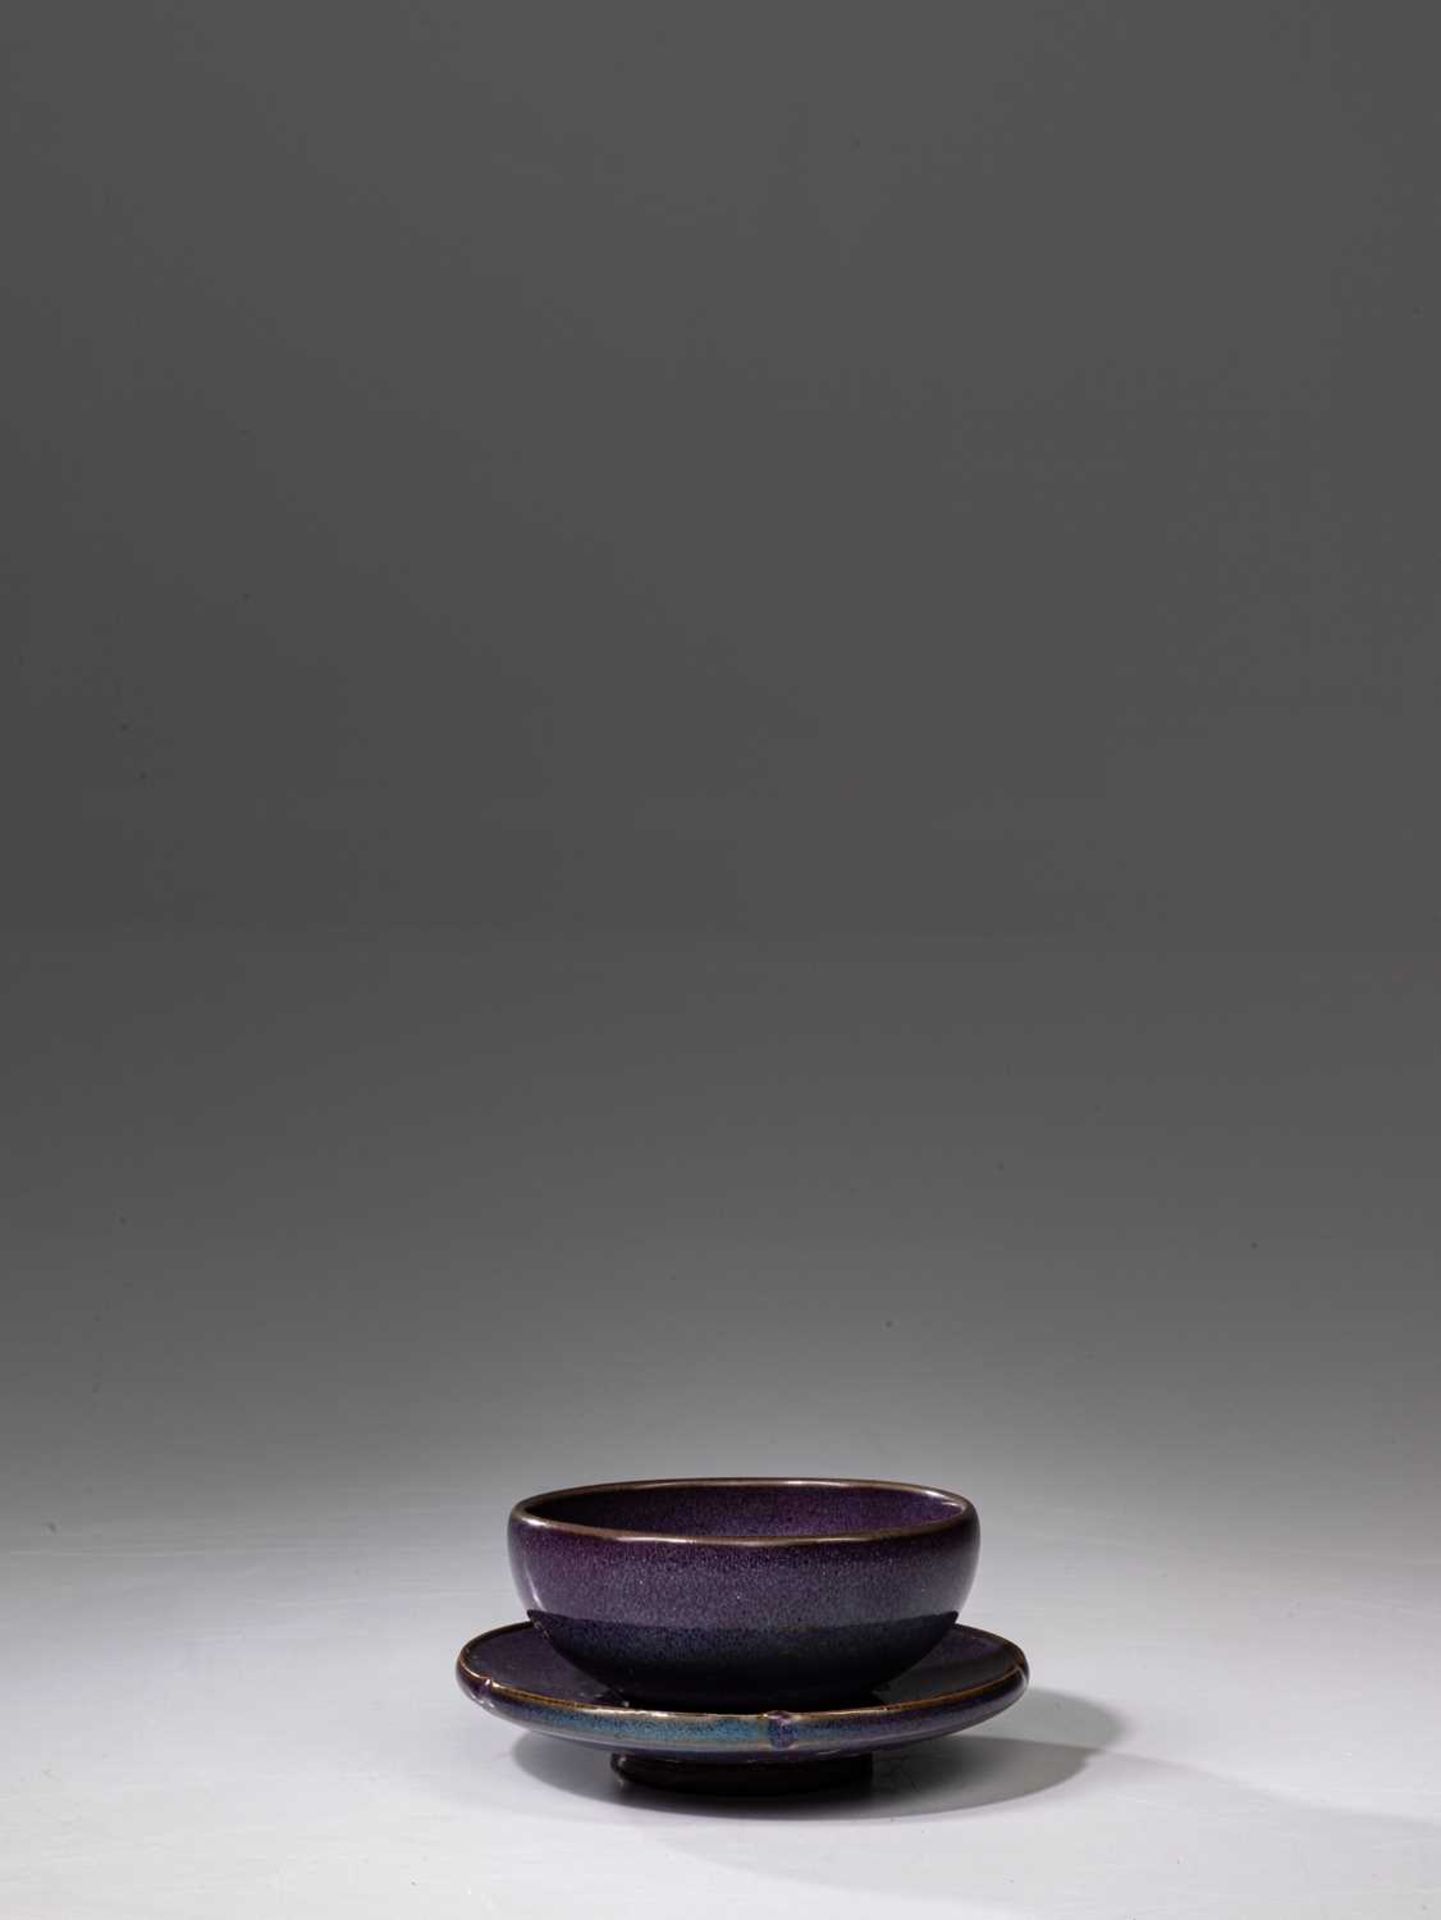 CUP WITH SAUCER - Image 3 of 6